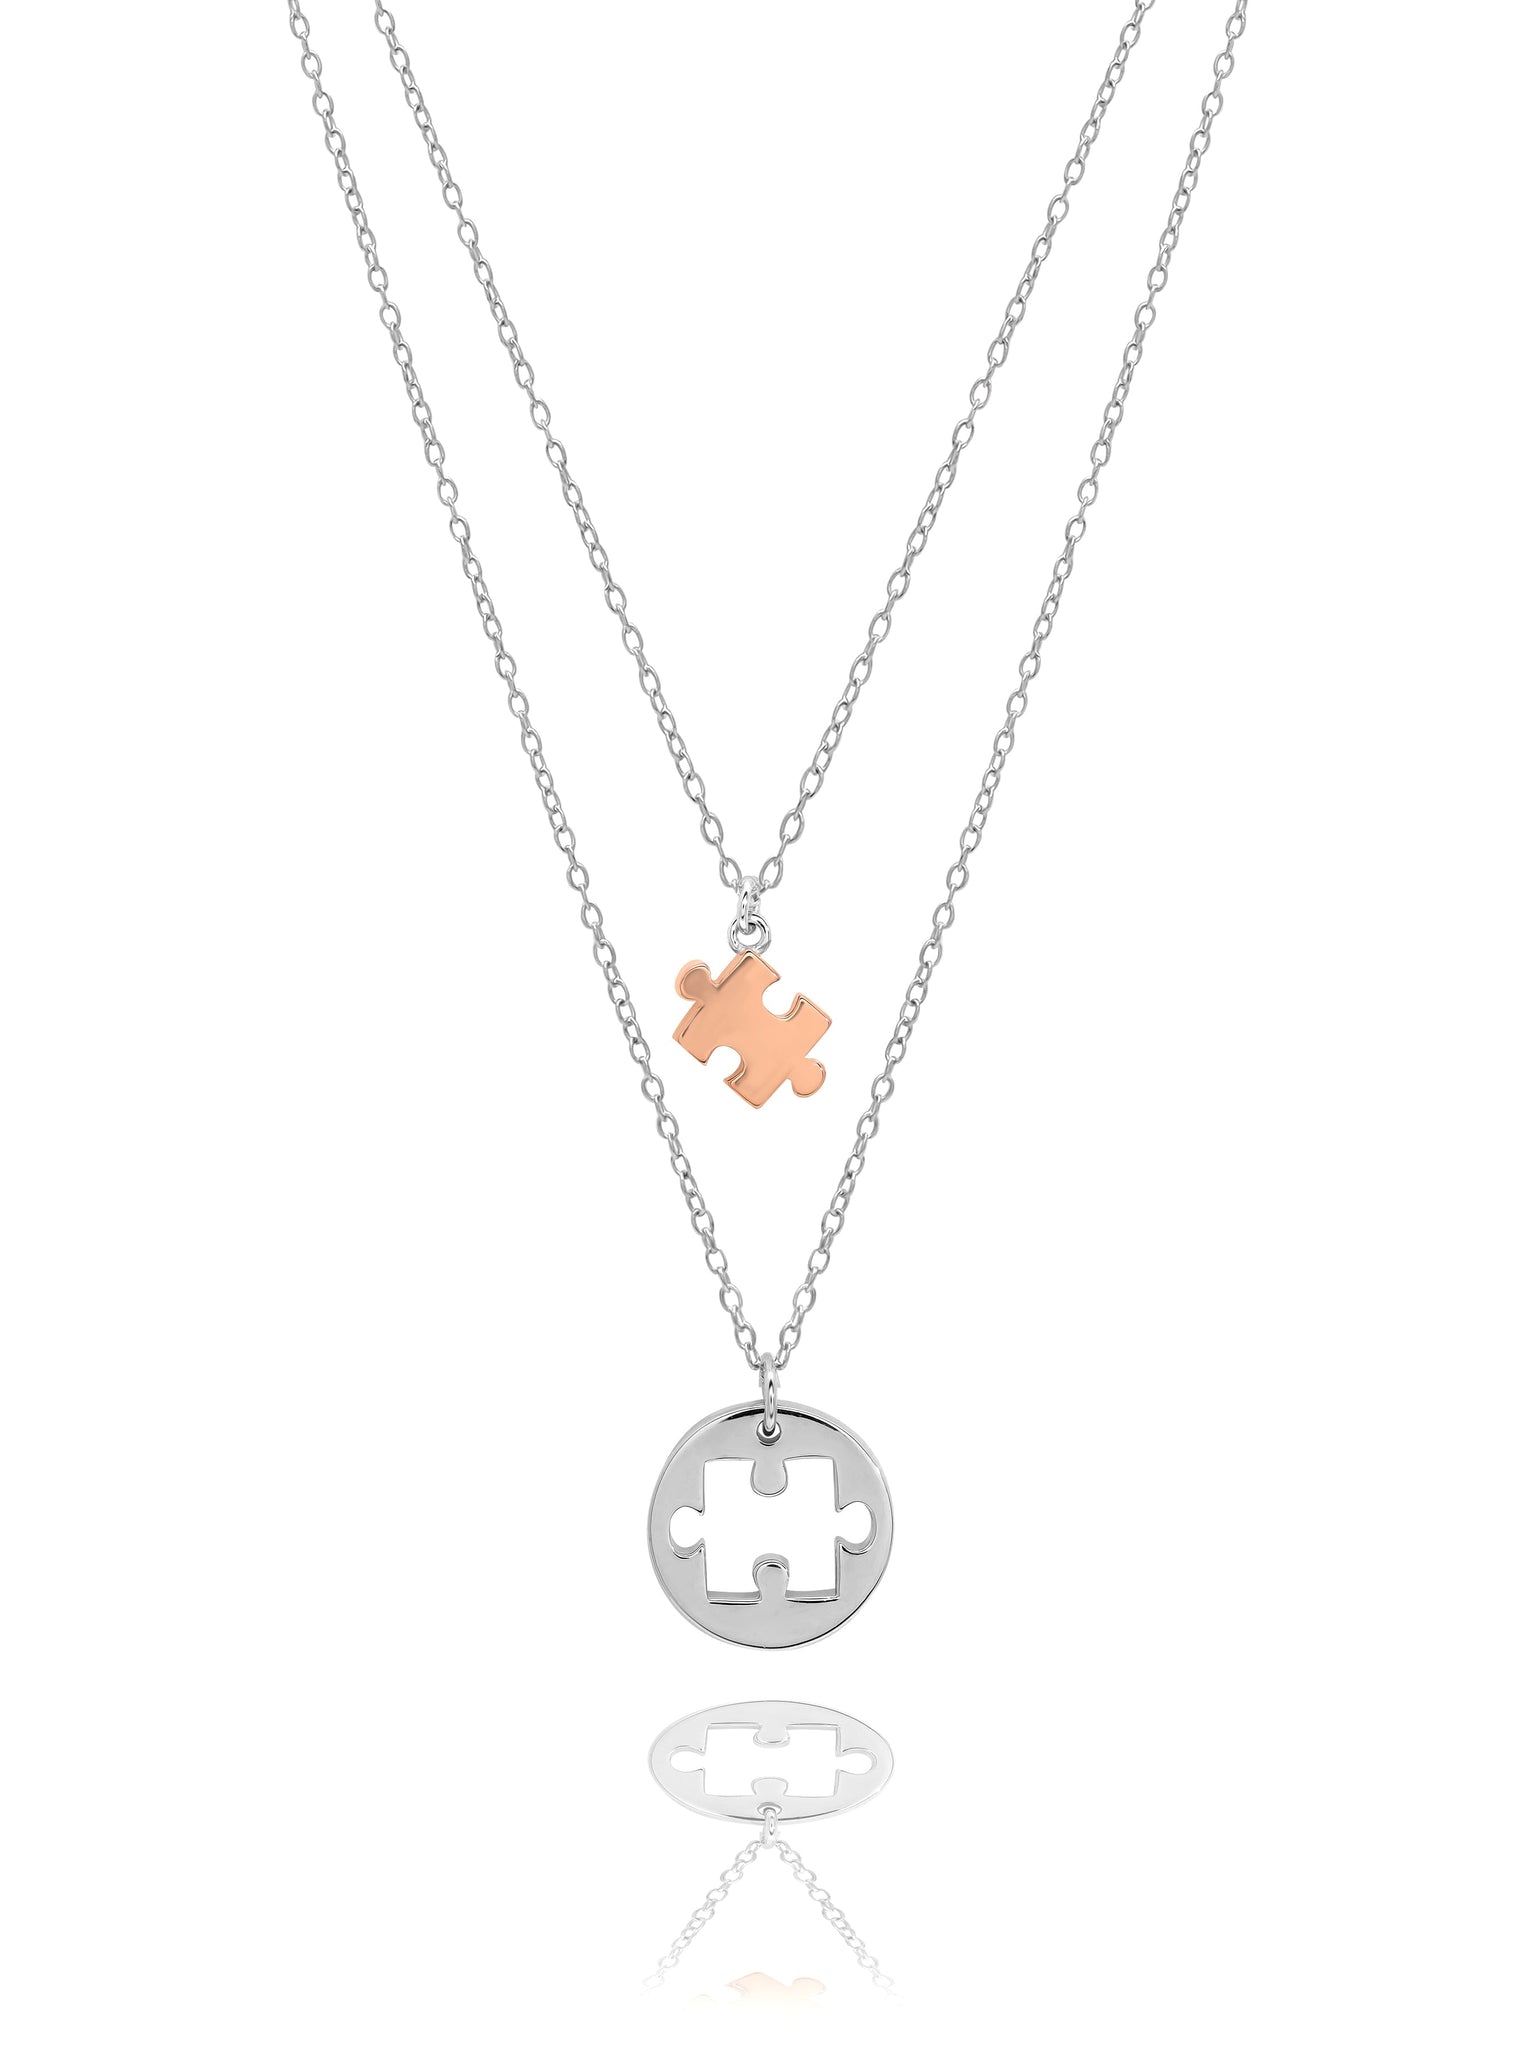 Dual Layered Puzzle Pendant With Link Chain 